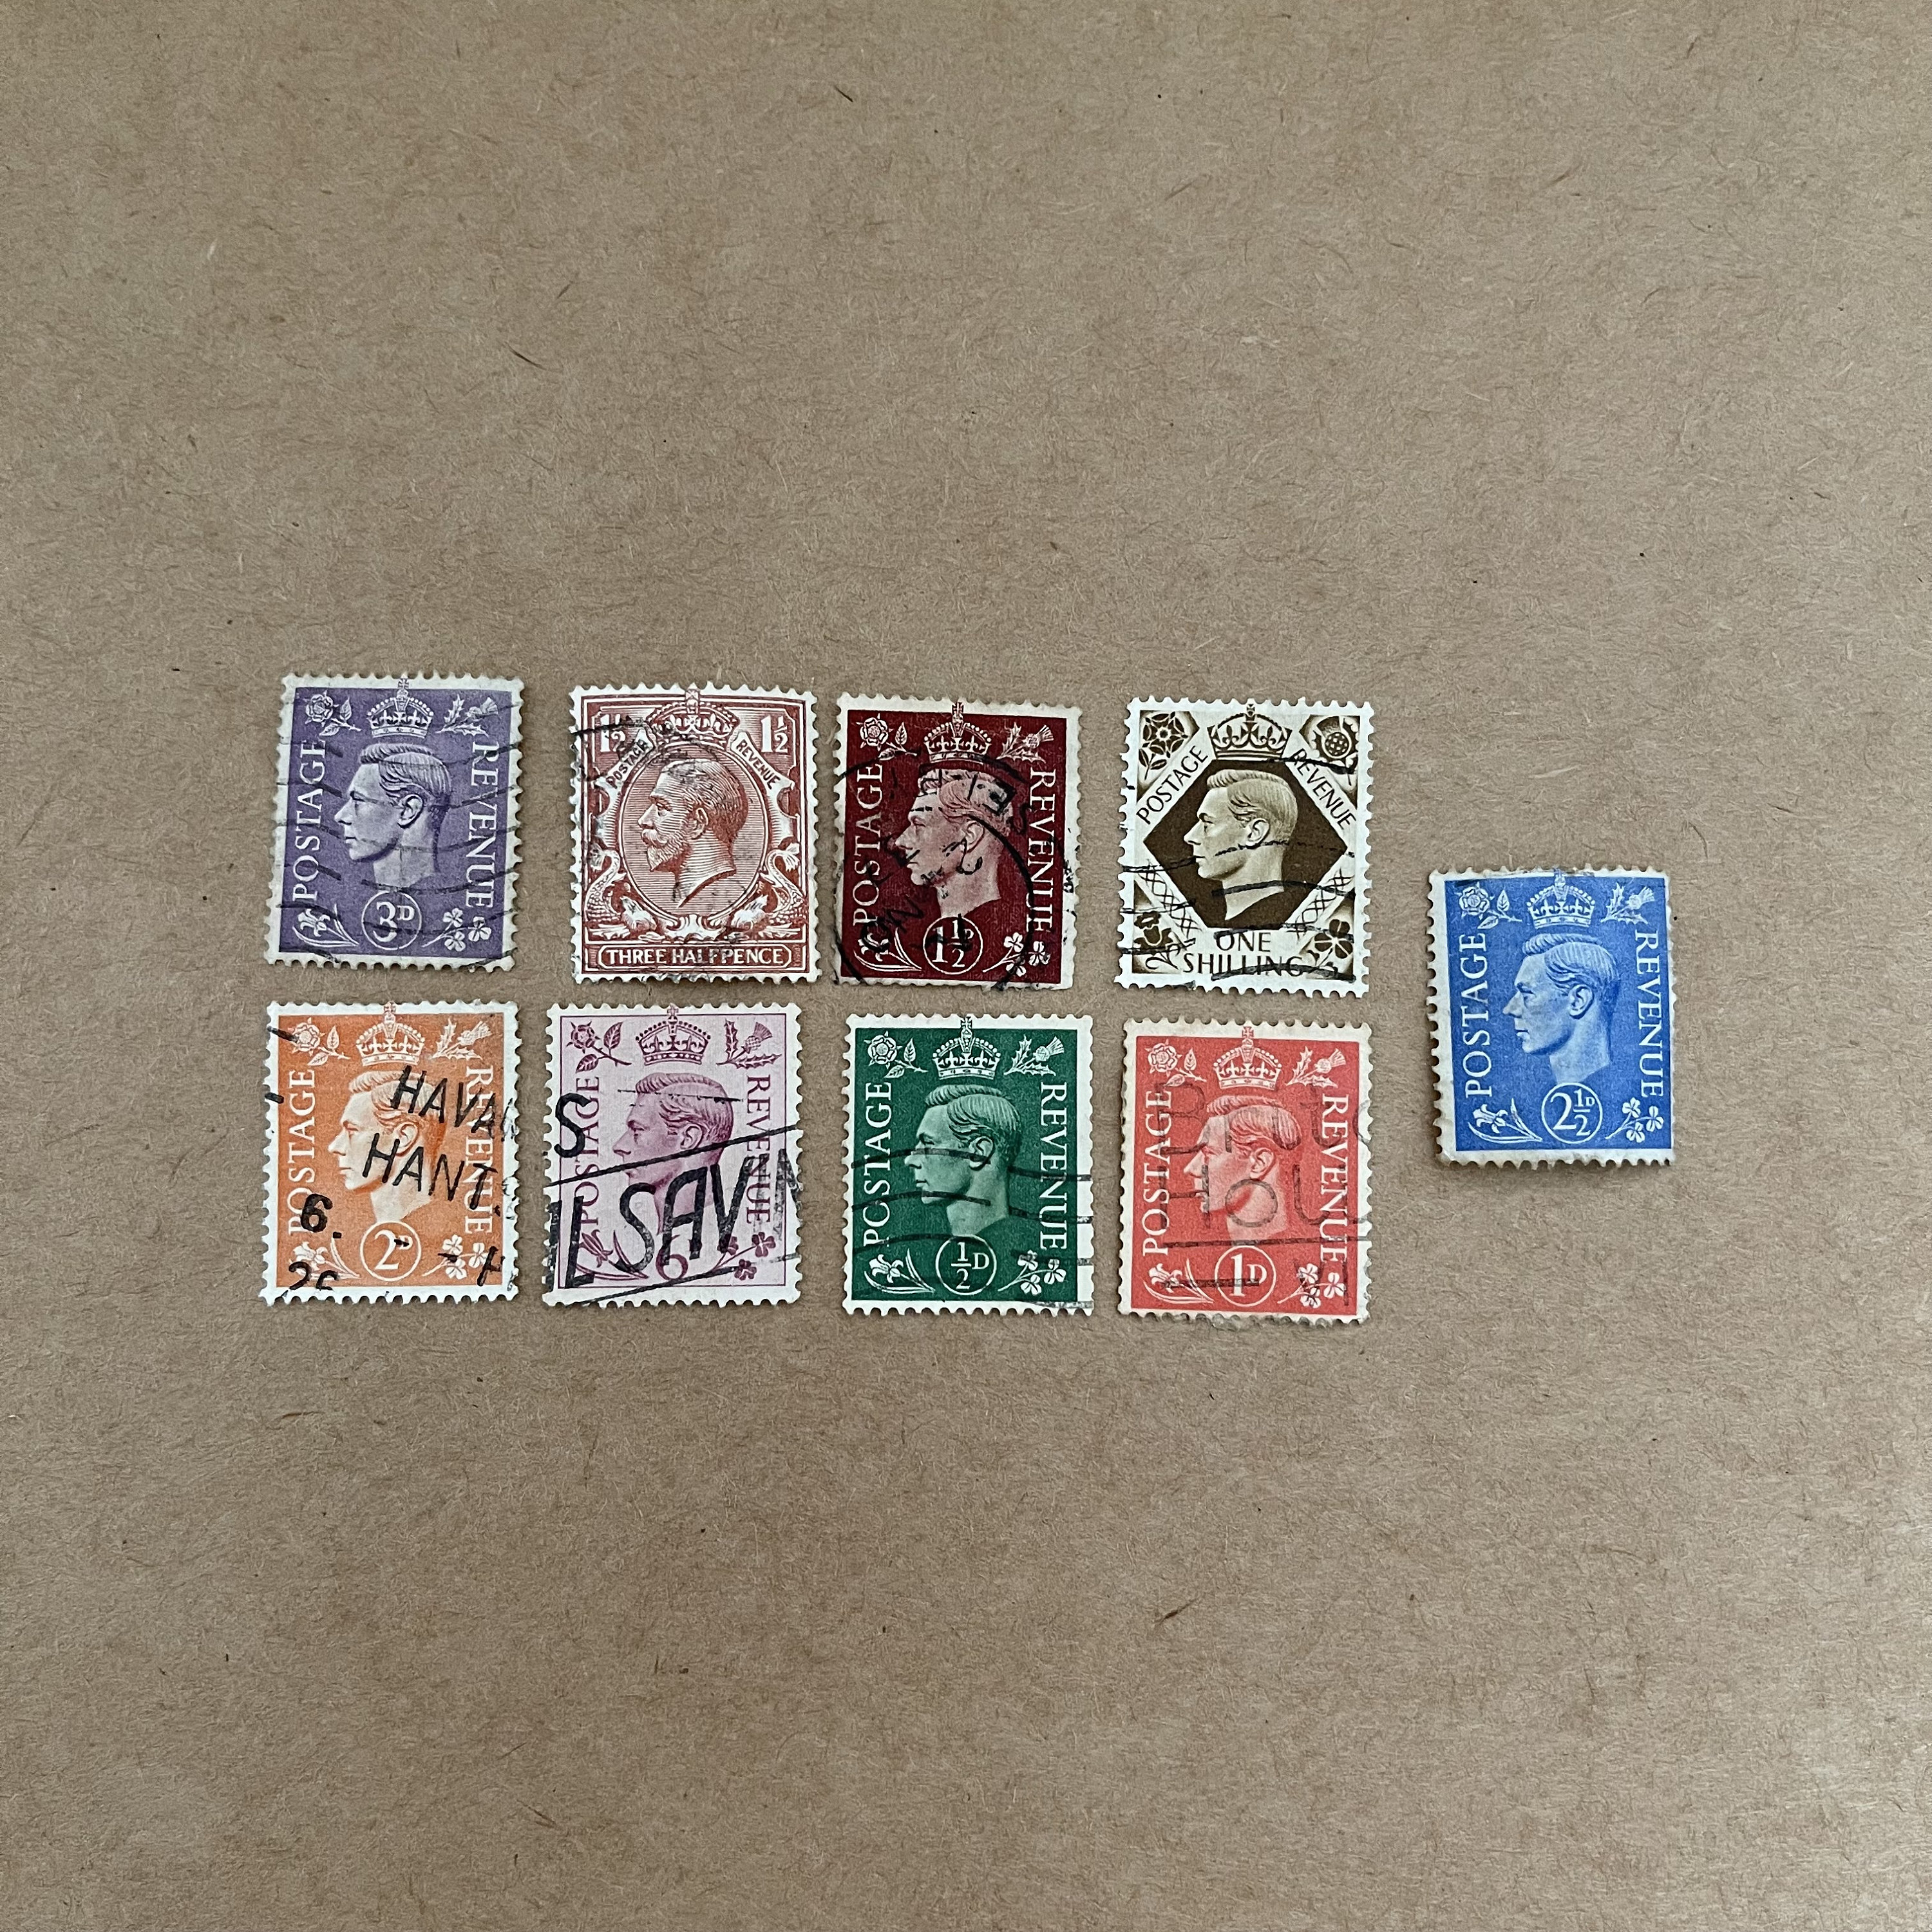 25 Used Rainbow Old British Postage Stamps, All Different, All off